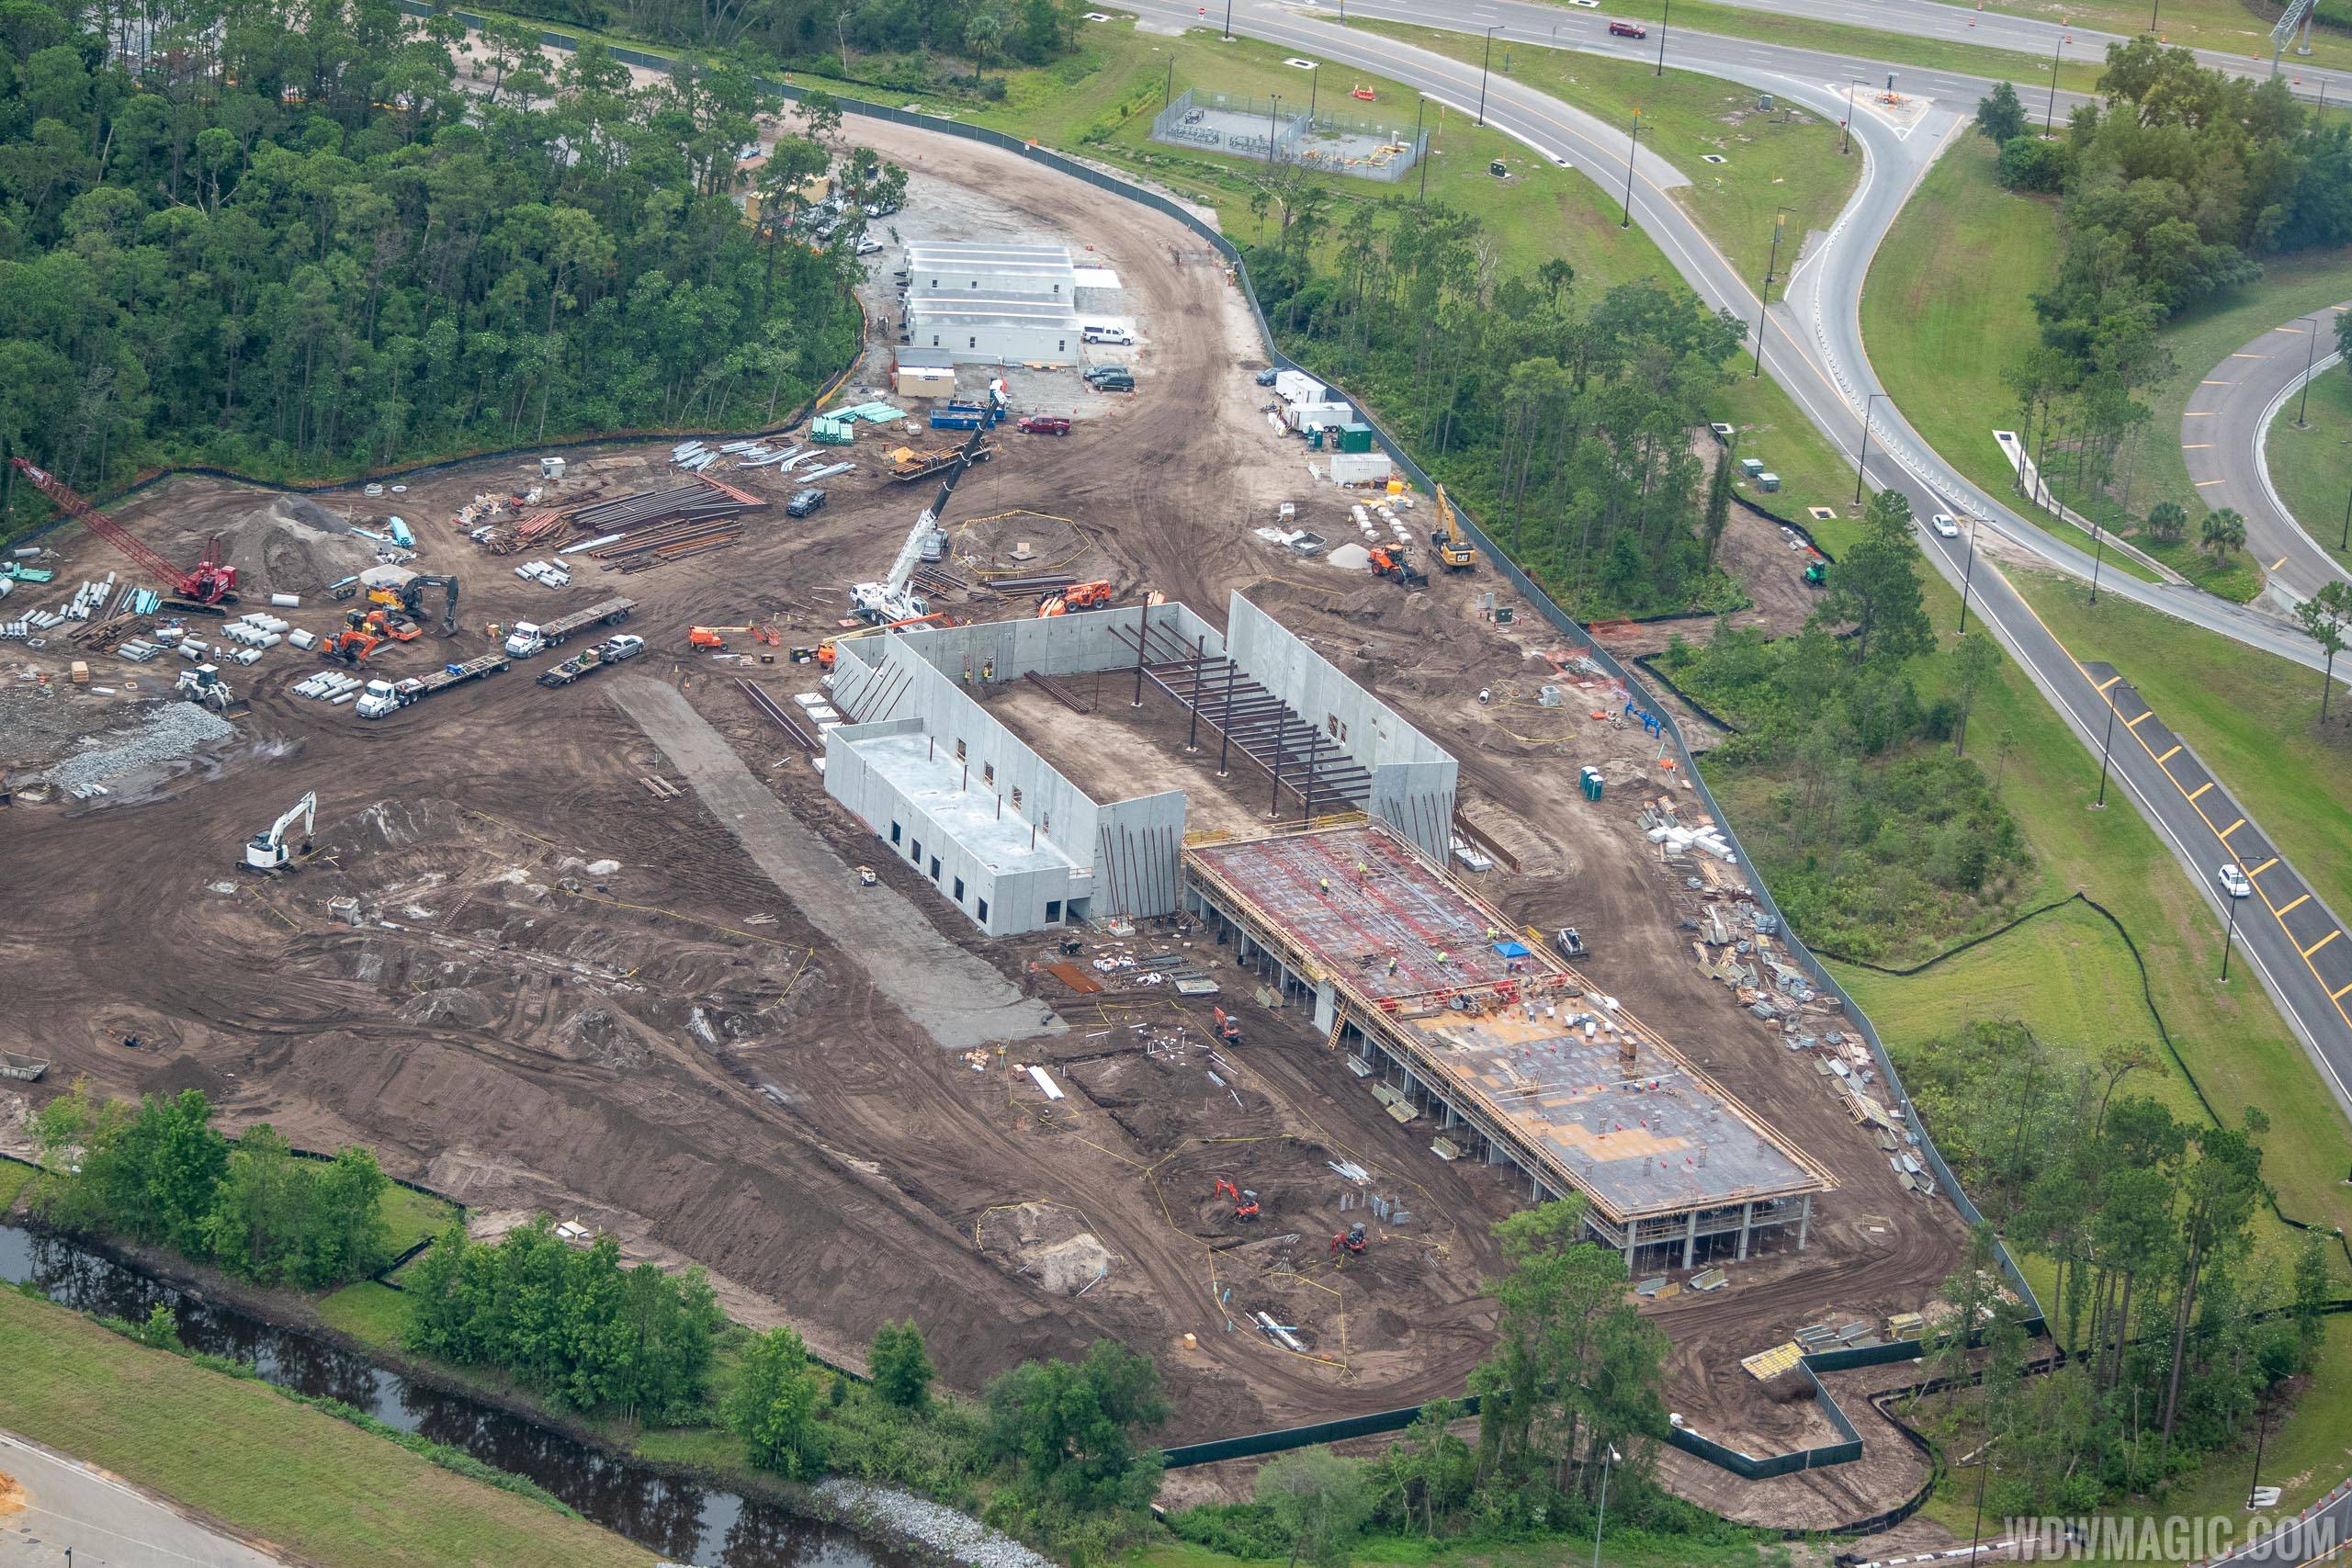 PHOTOS - Latest construction pictures of the Star Wars hotel at Walt Disney World